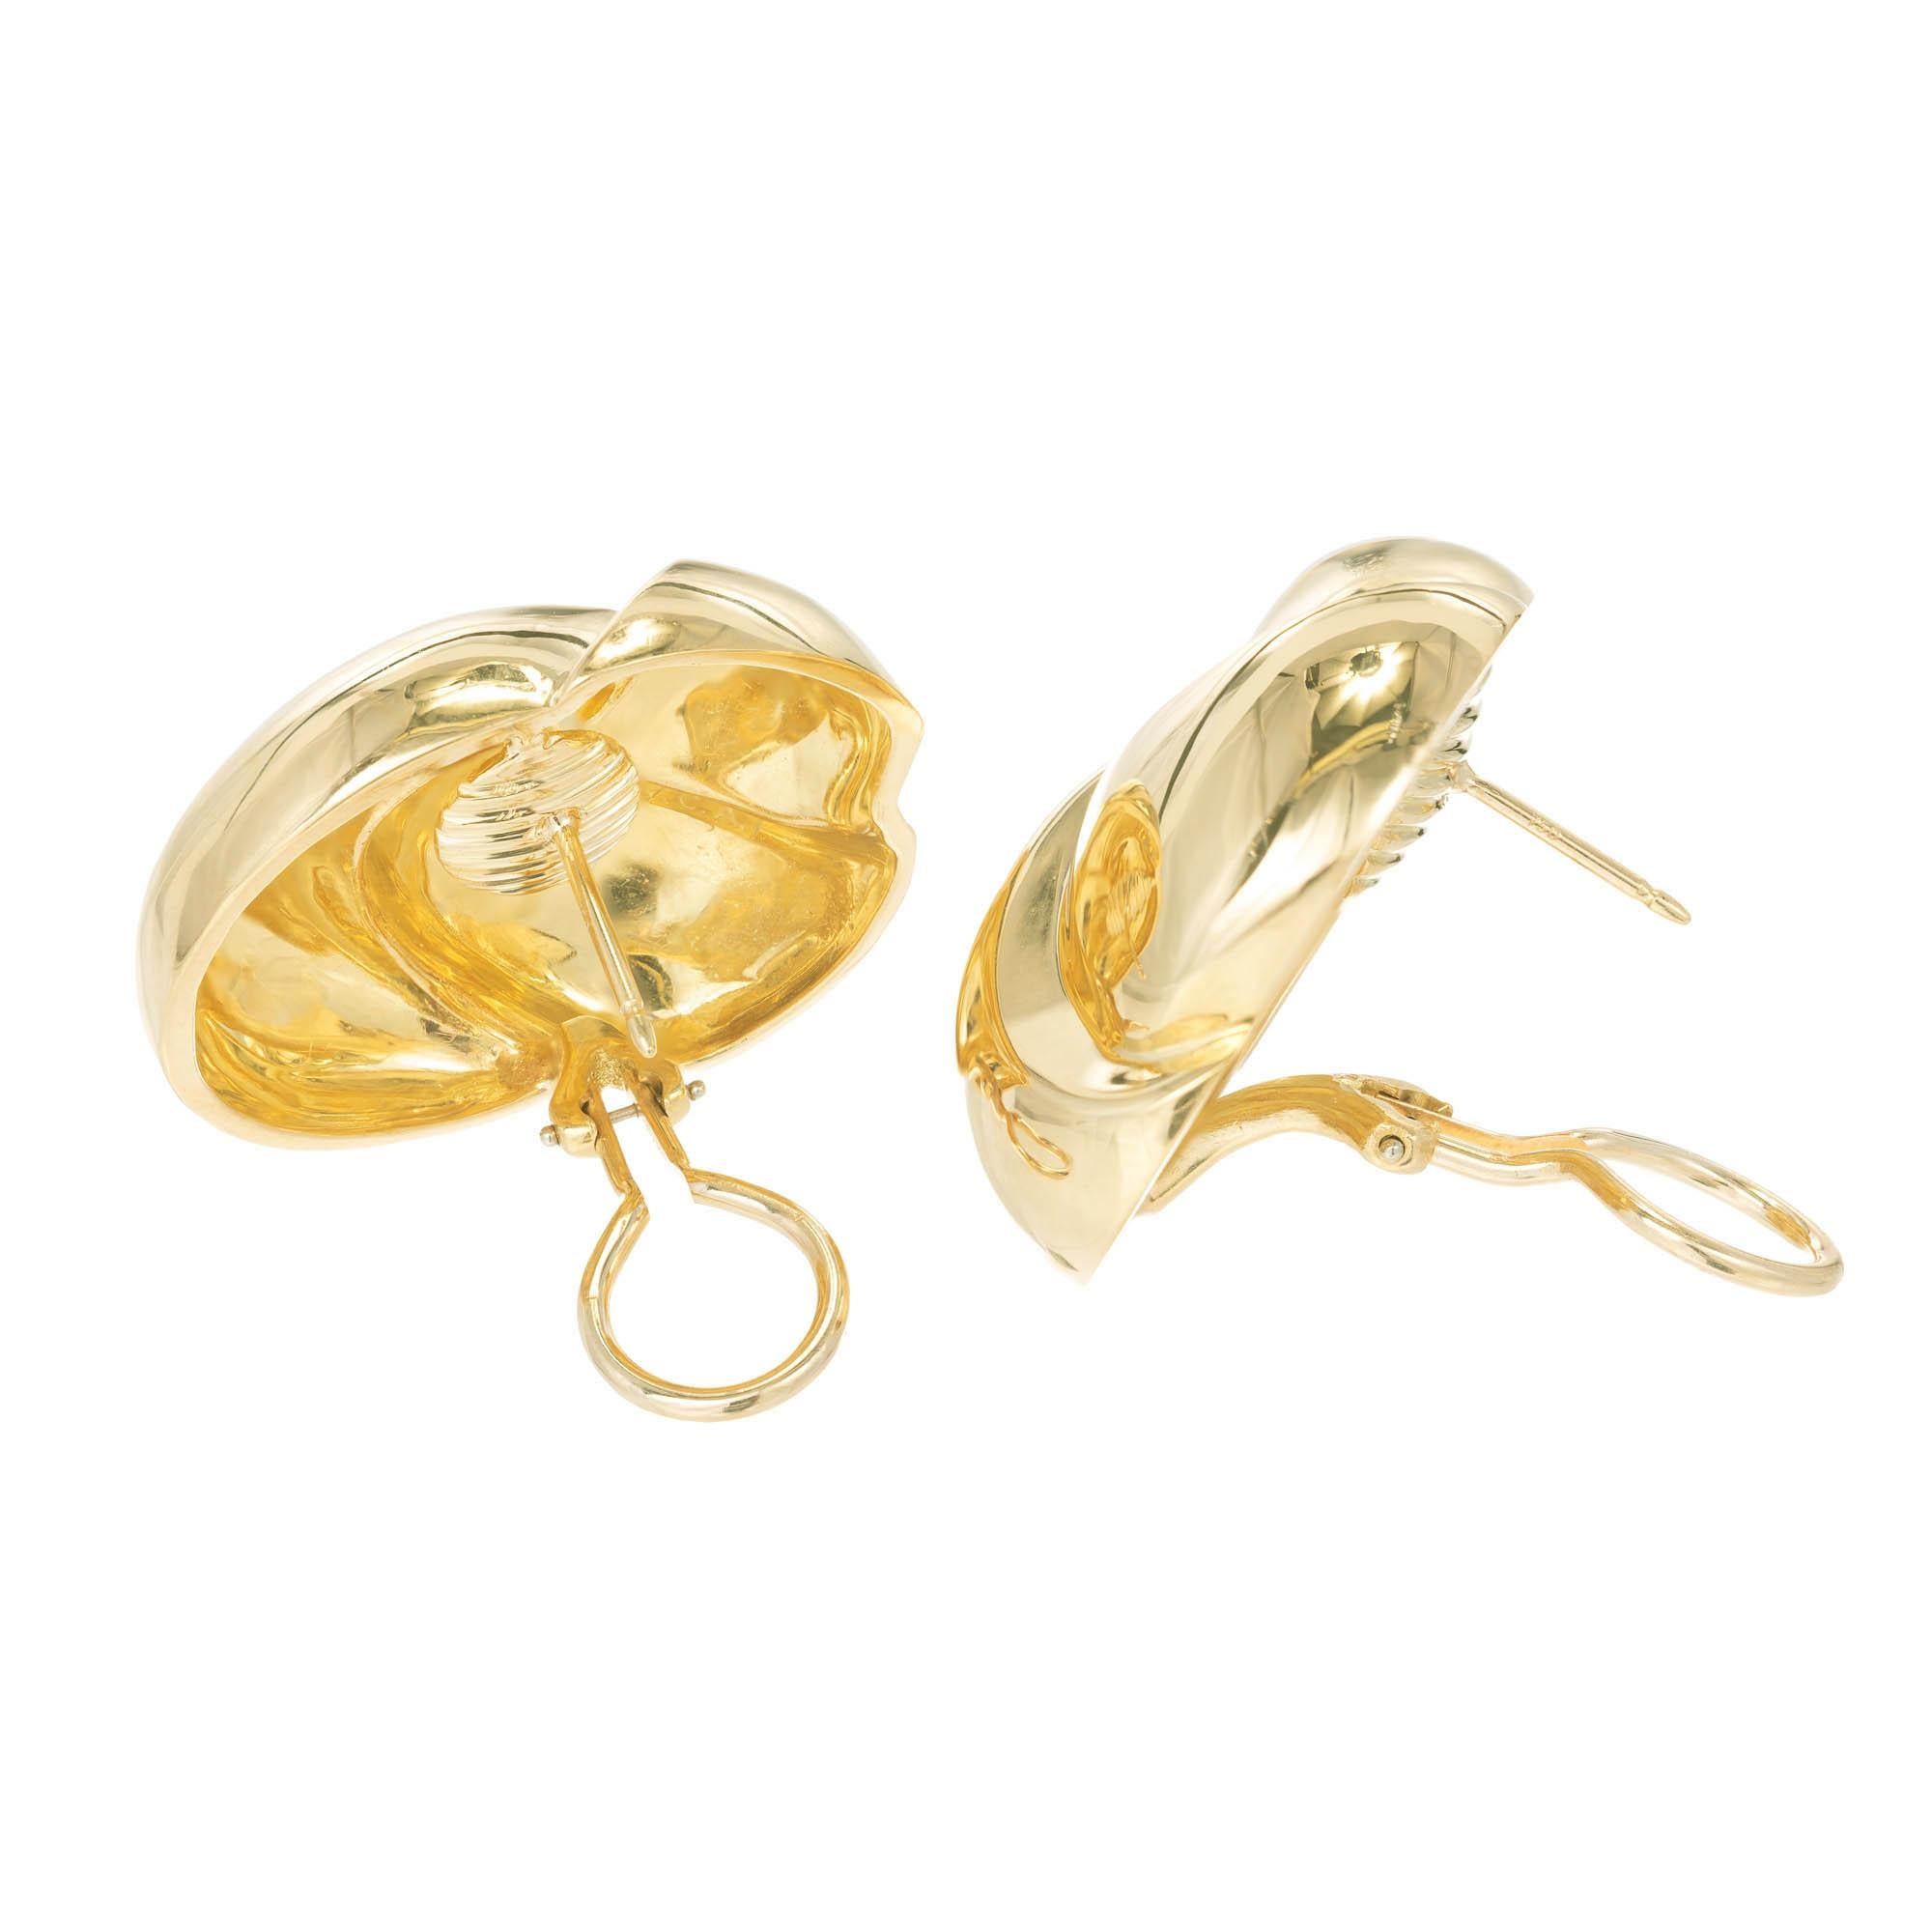 Van Cleef & Arpels 18k yellow gold clip post earrings. Classic swirl knot design. Circa 1980.

18k Yellow Gold
Tested: 18k
Stamped: 750 18k
Hallmark: VCA 
32.8 Grams
Top to Bottom: 31.01mm or 1.22 Inches
Width: 31.75mm or 1.25 Inches
Depth or